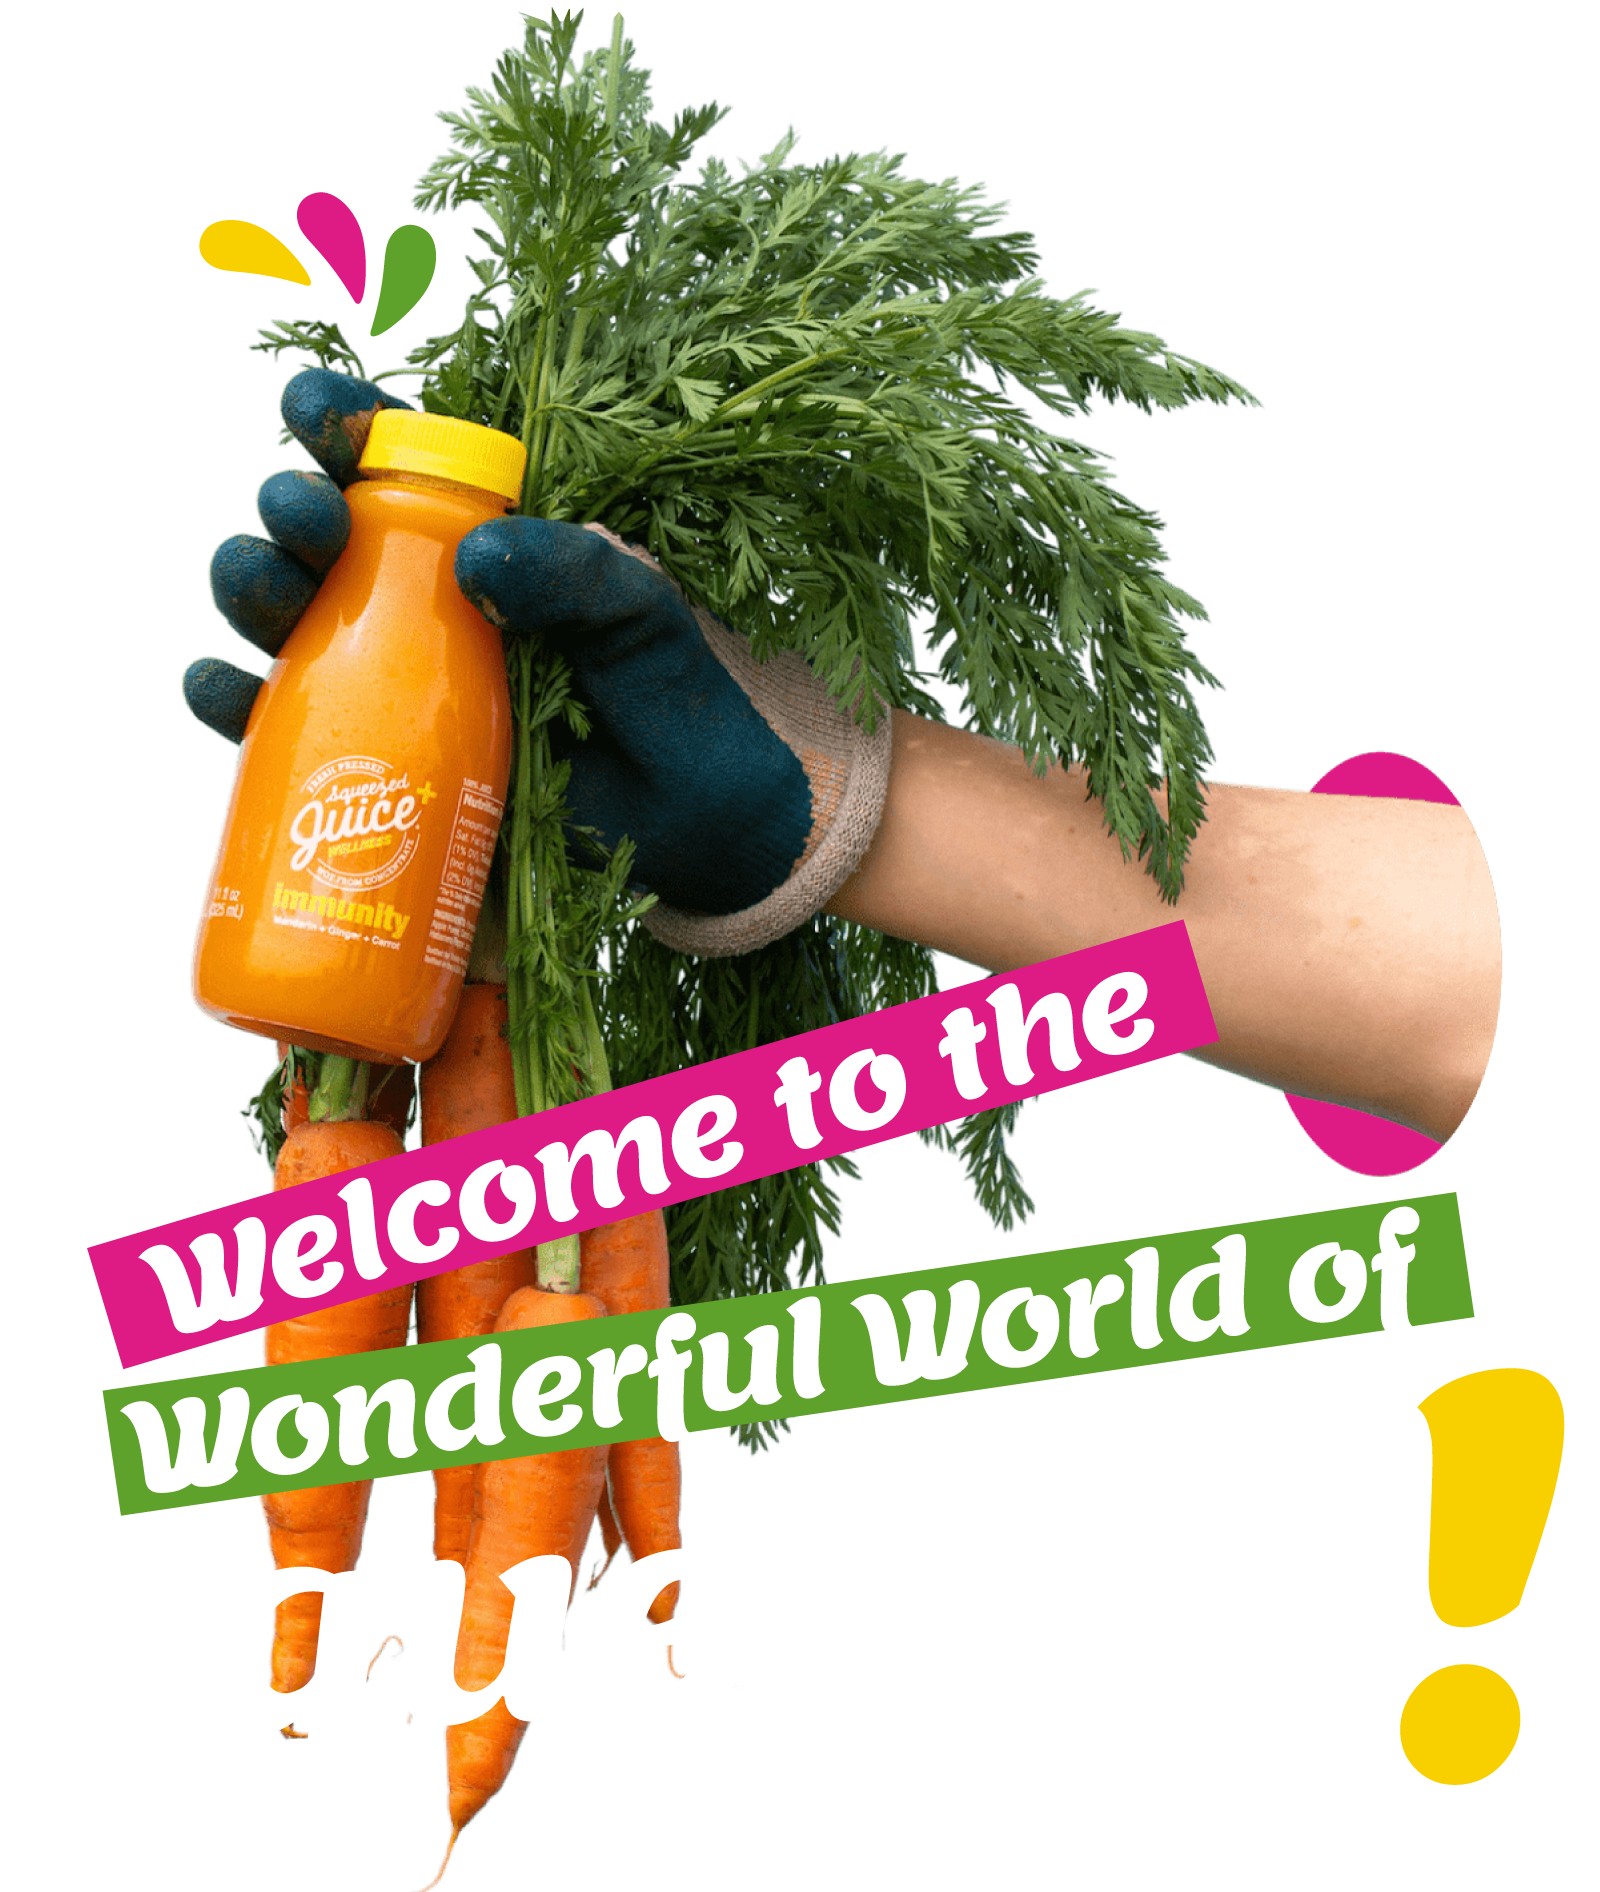 Welcome to the Wonderful World of Squeezed!